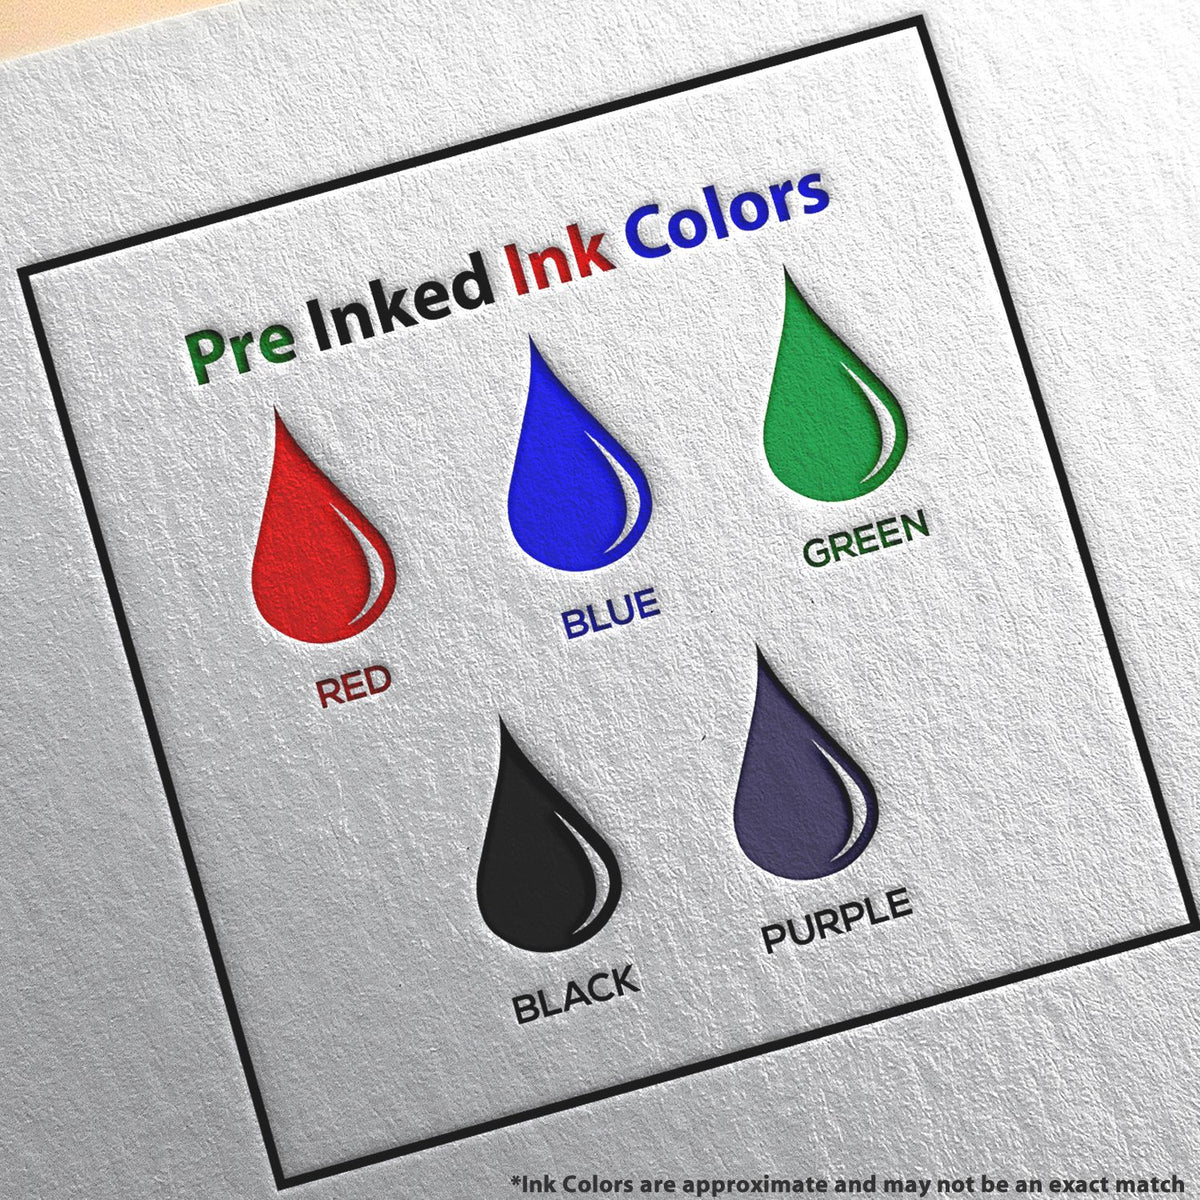 A picture showing the different ink colors or hues available for the Premium MaxLight Pre-Inked Kentucky Engineering Stamp product.